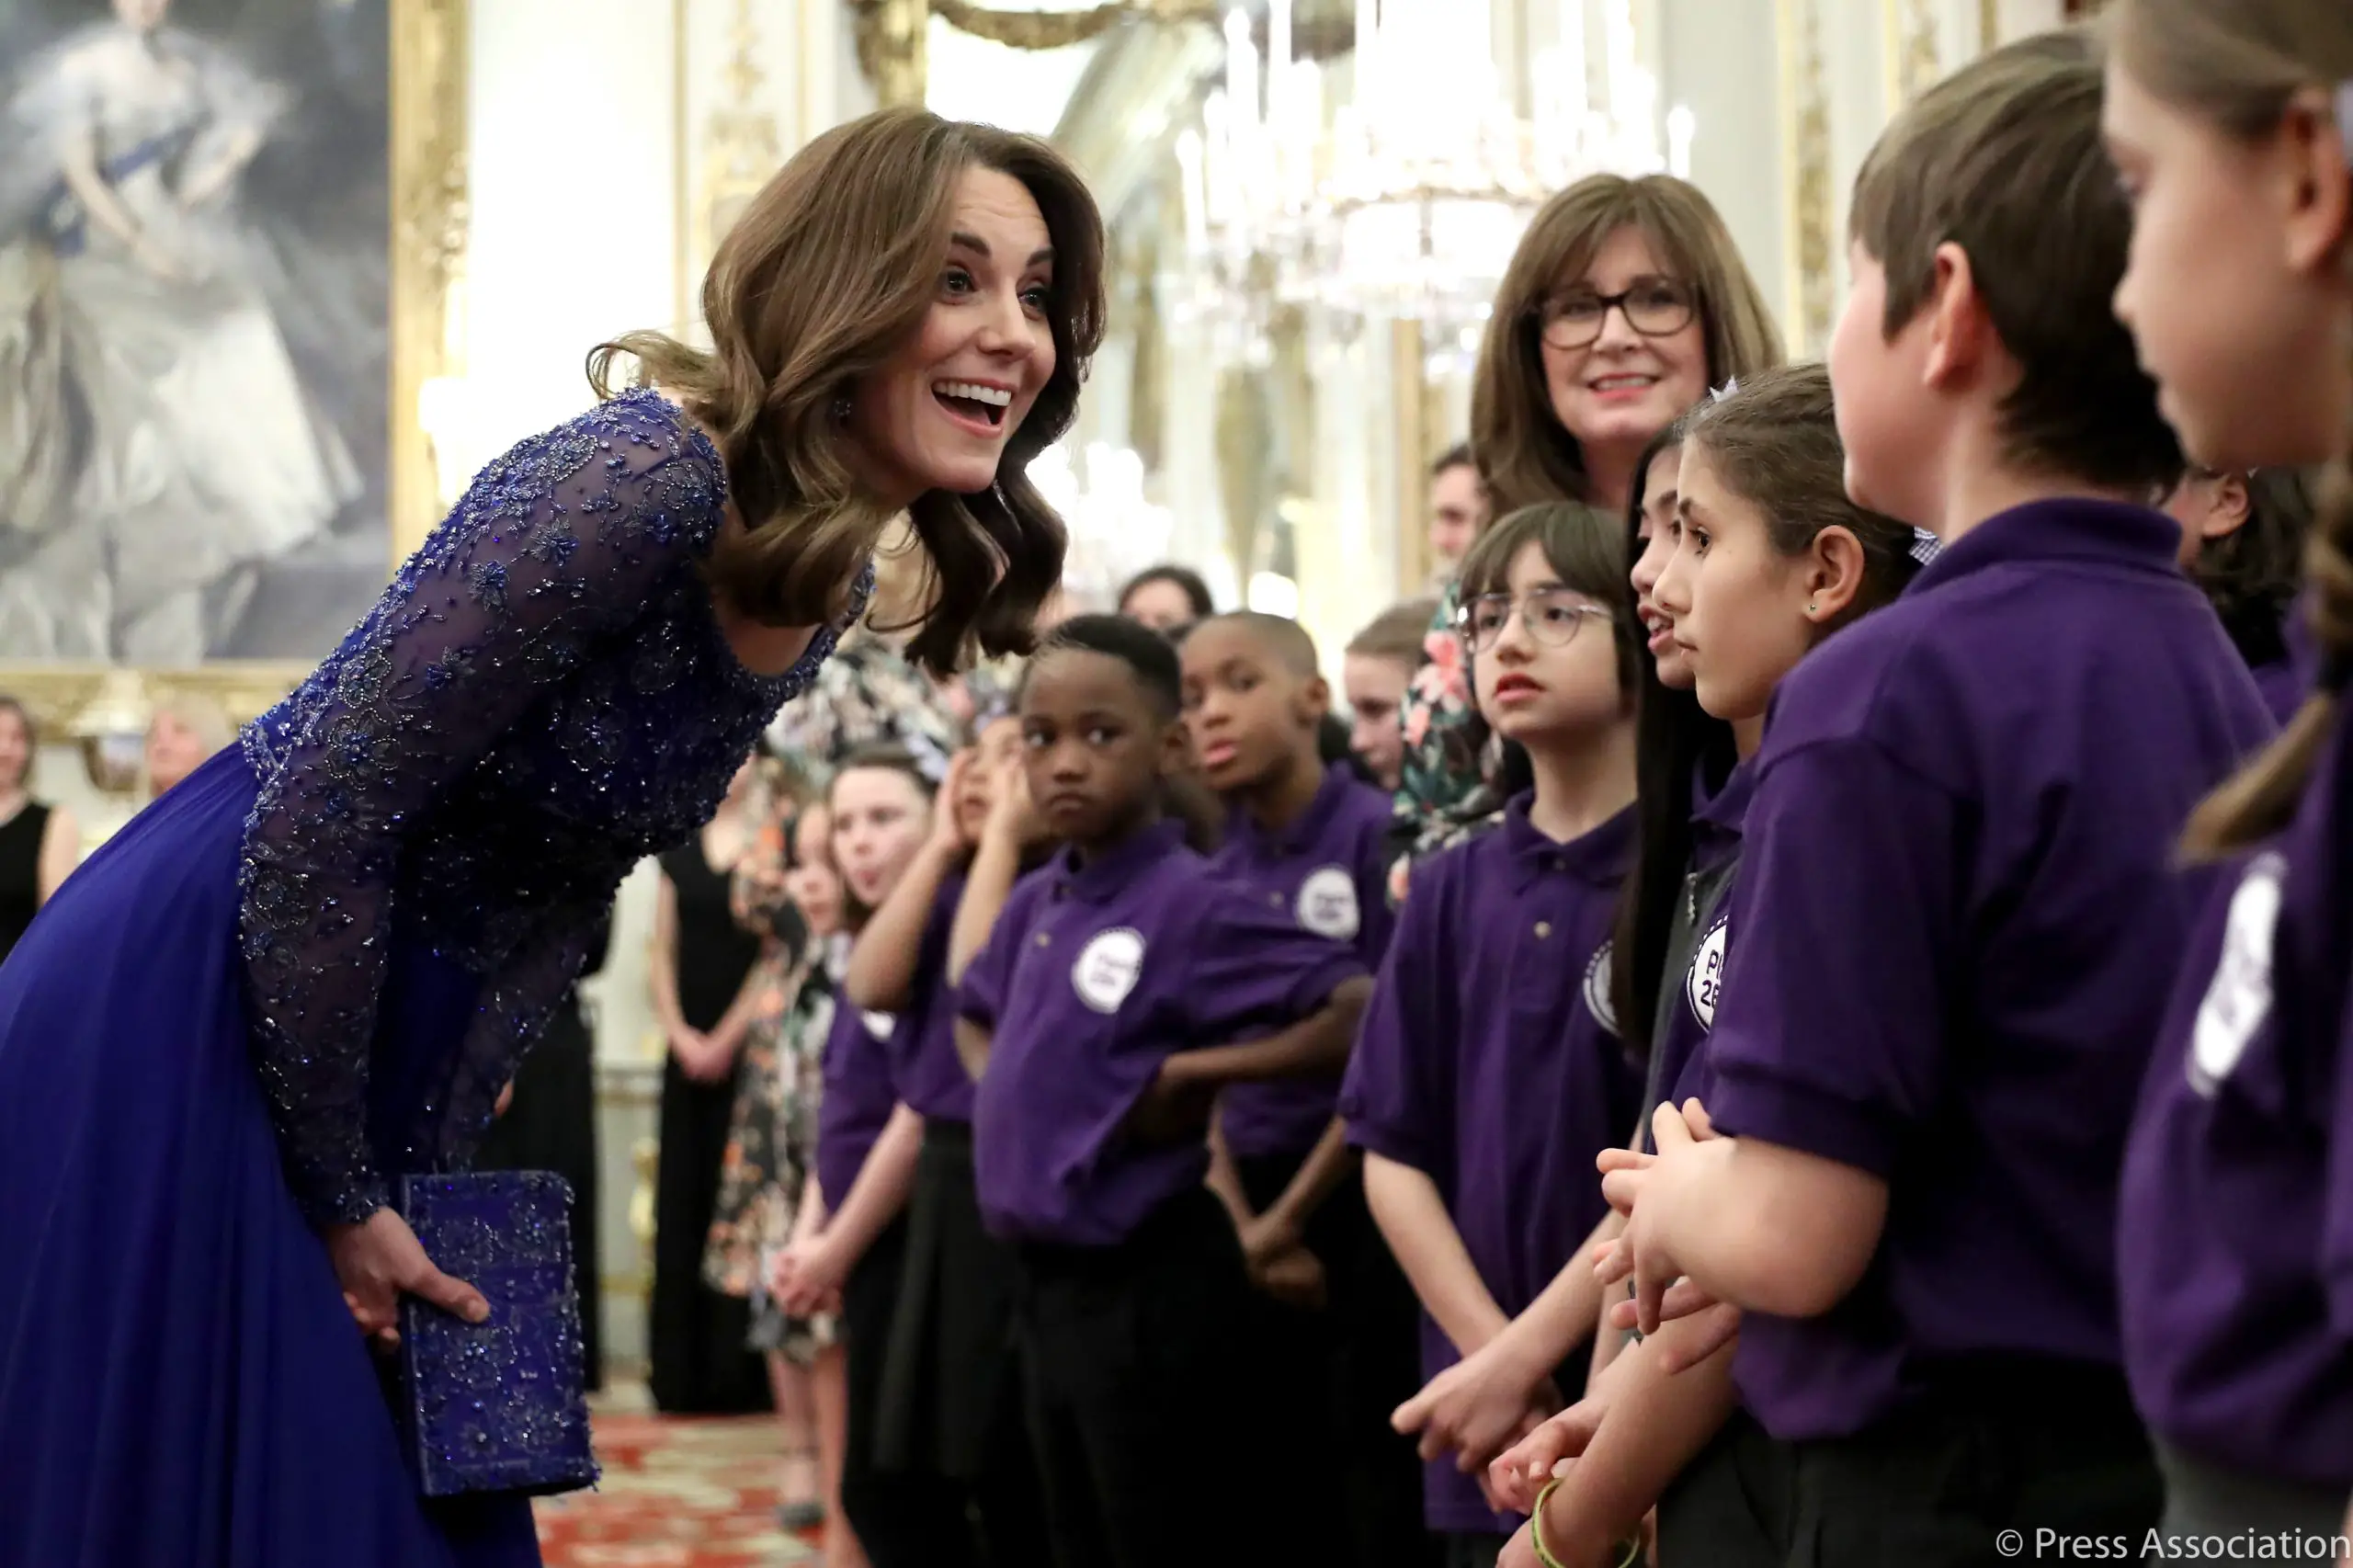 Children’s mental health has long been a priority for The Duchess of Cambridge.